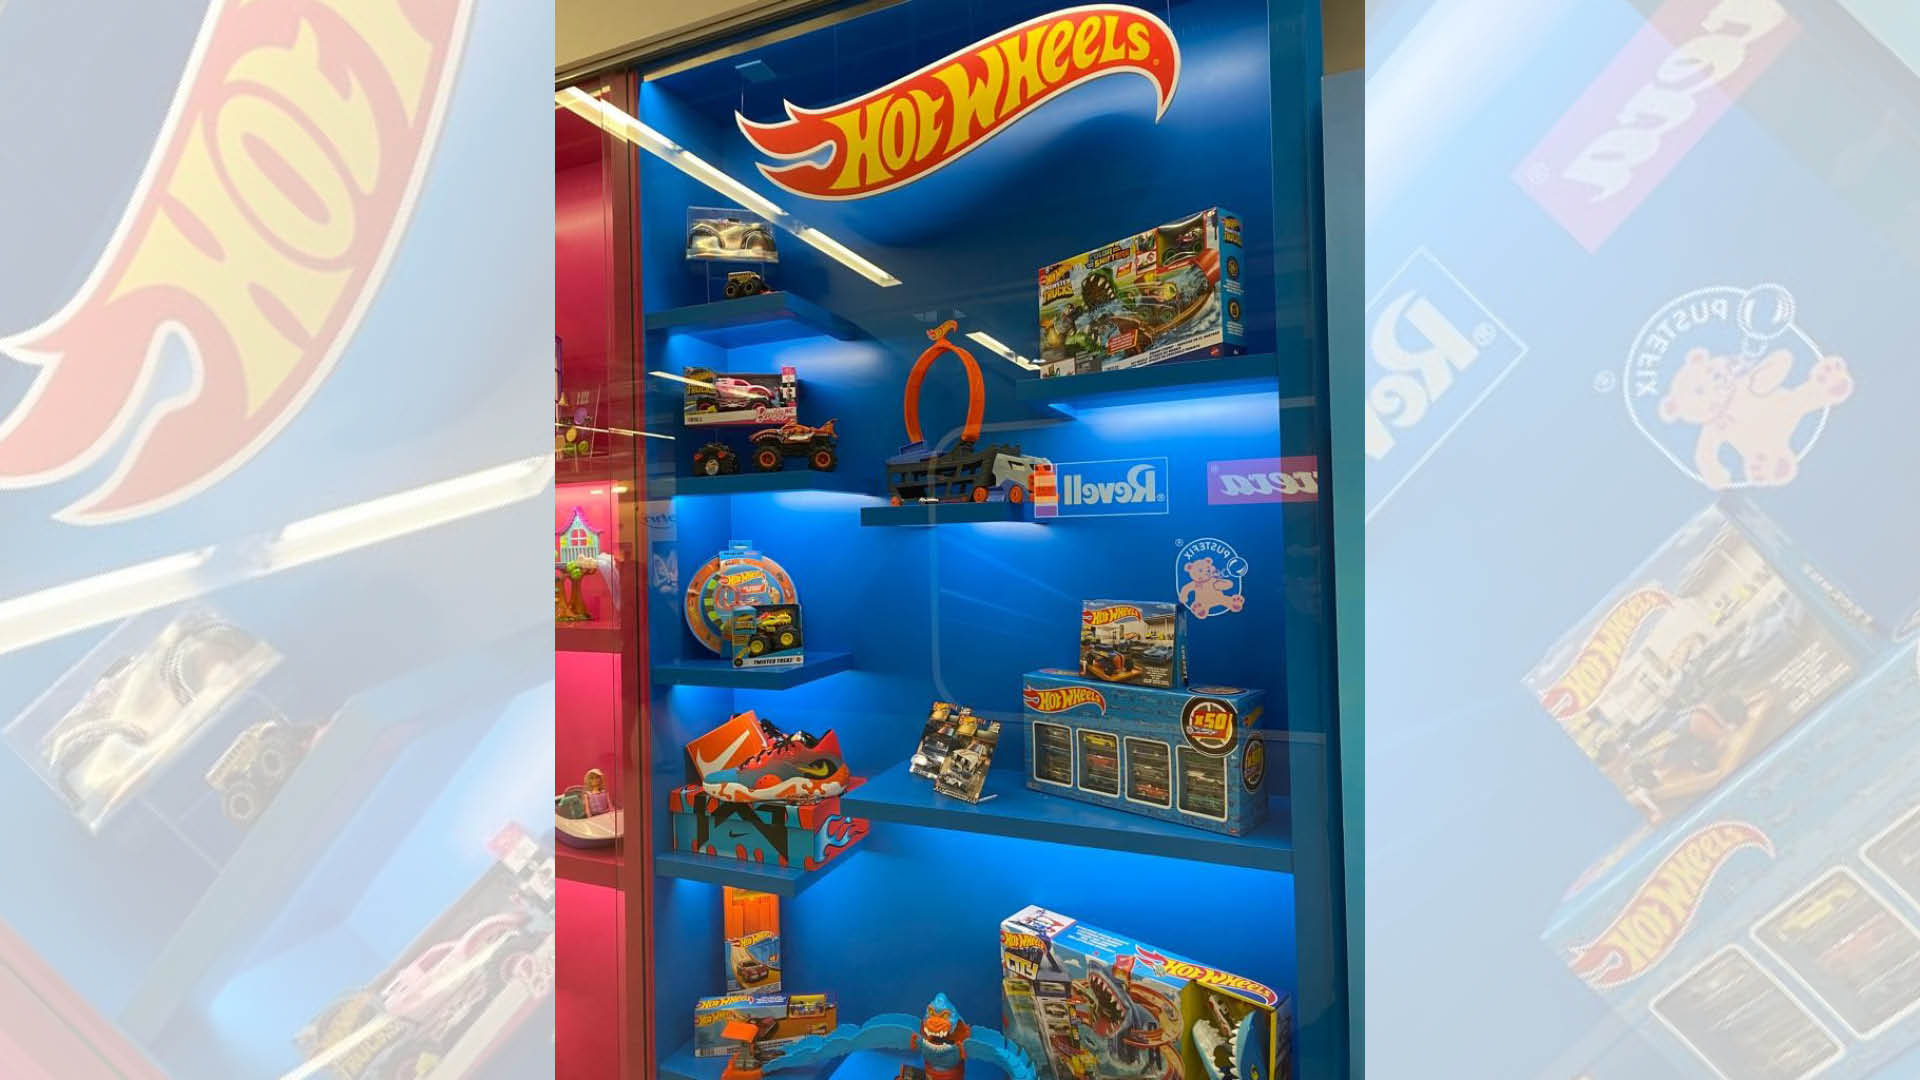 Toy Trends From Nuremberg